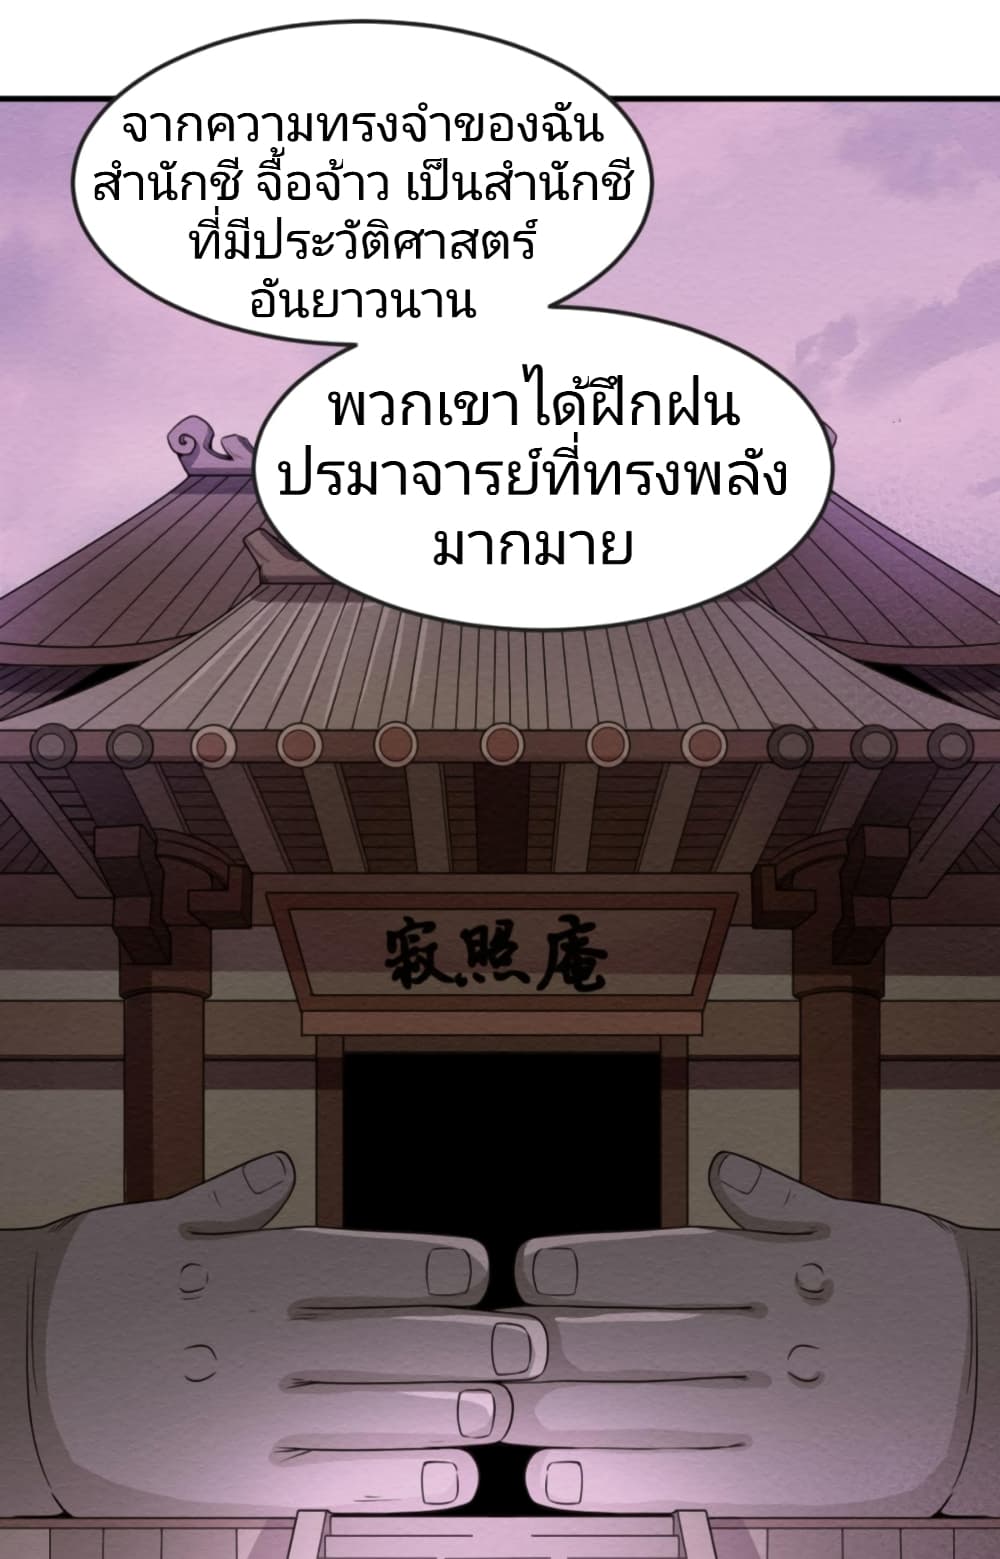 The Age of Ghost Spirits à¸à¸­à¸à¸à¸µà¹ 41 (2)